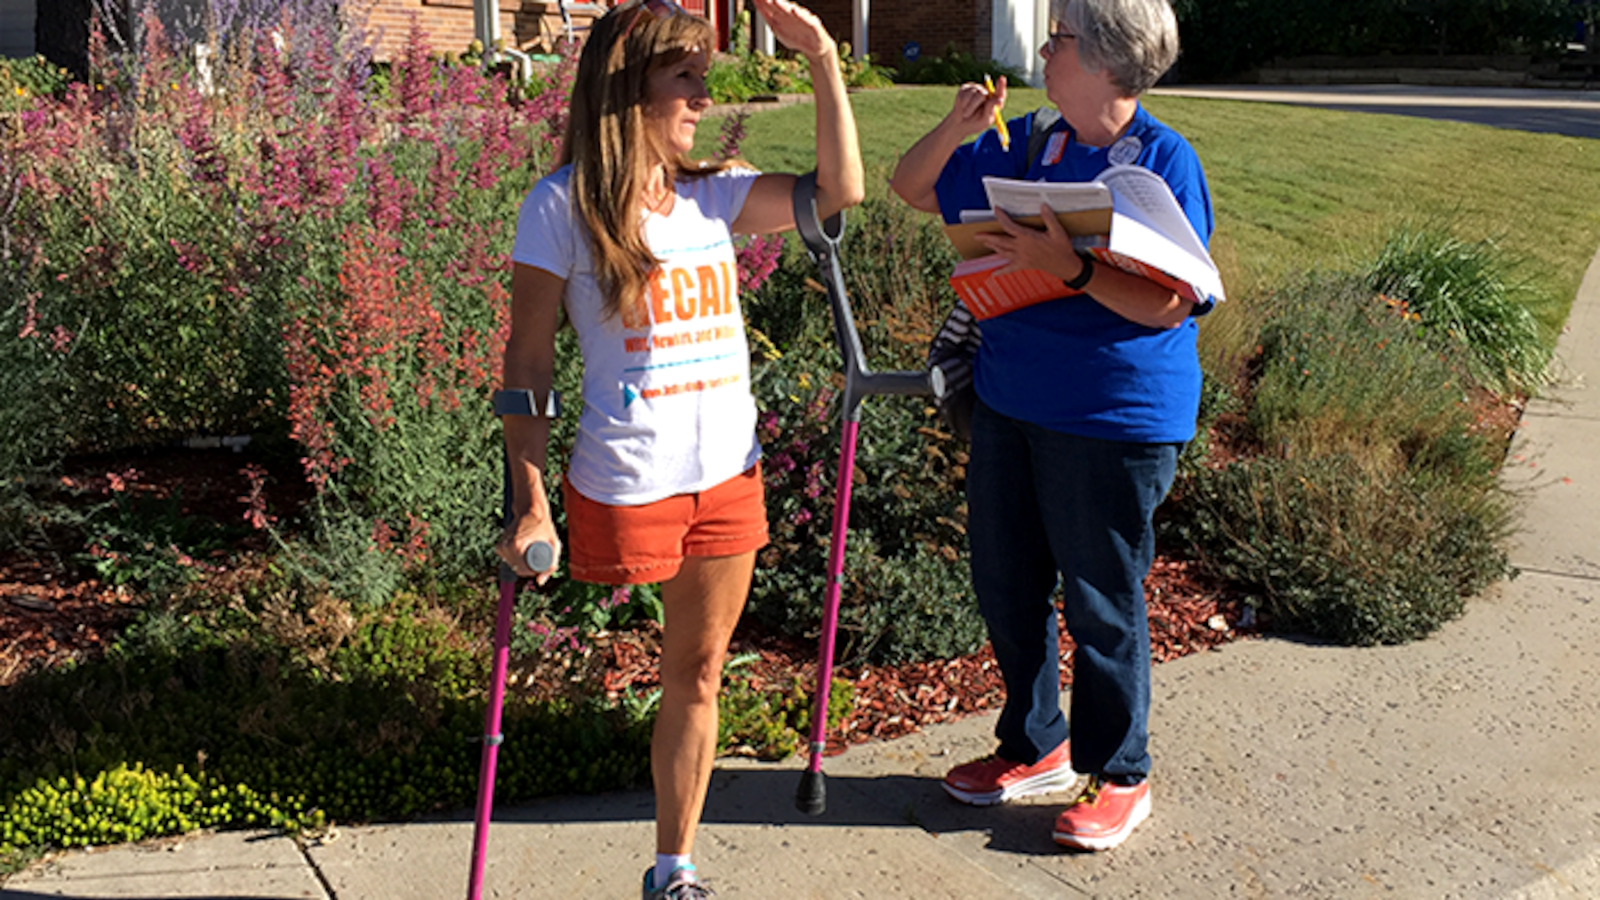 Jeffco United volunteers Annie Bitsie, left, and Nancy McCanless search for their next house to canvass Sept. 19. The two were among hundreds of volunteers knocking on doors to support the school board recall effort in Jefferson County.